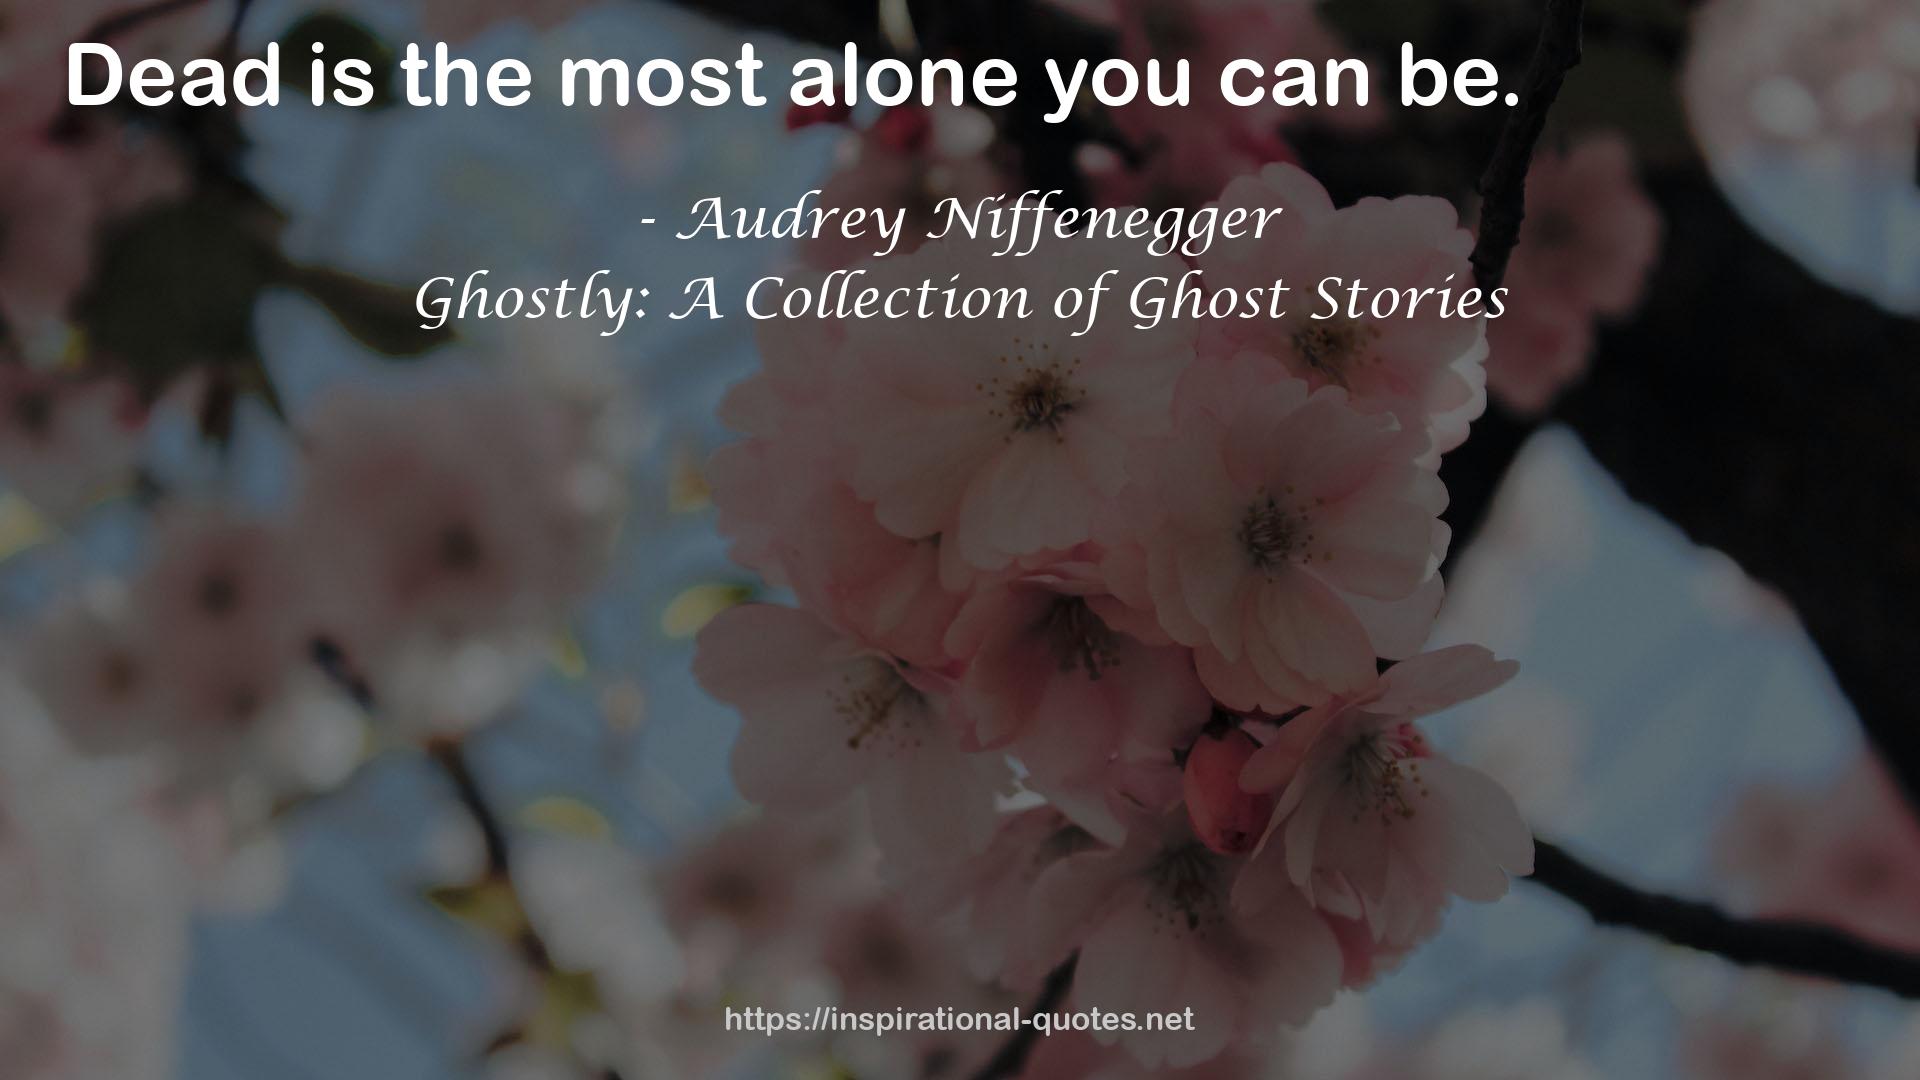 Ghostly: A Collection of Ghost Stories QUOTES